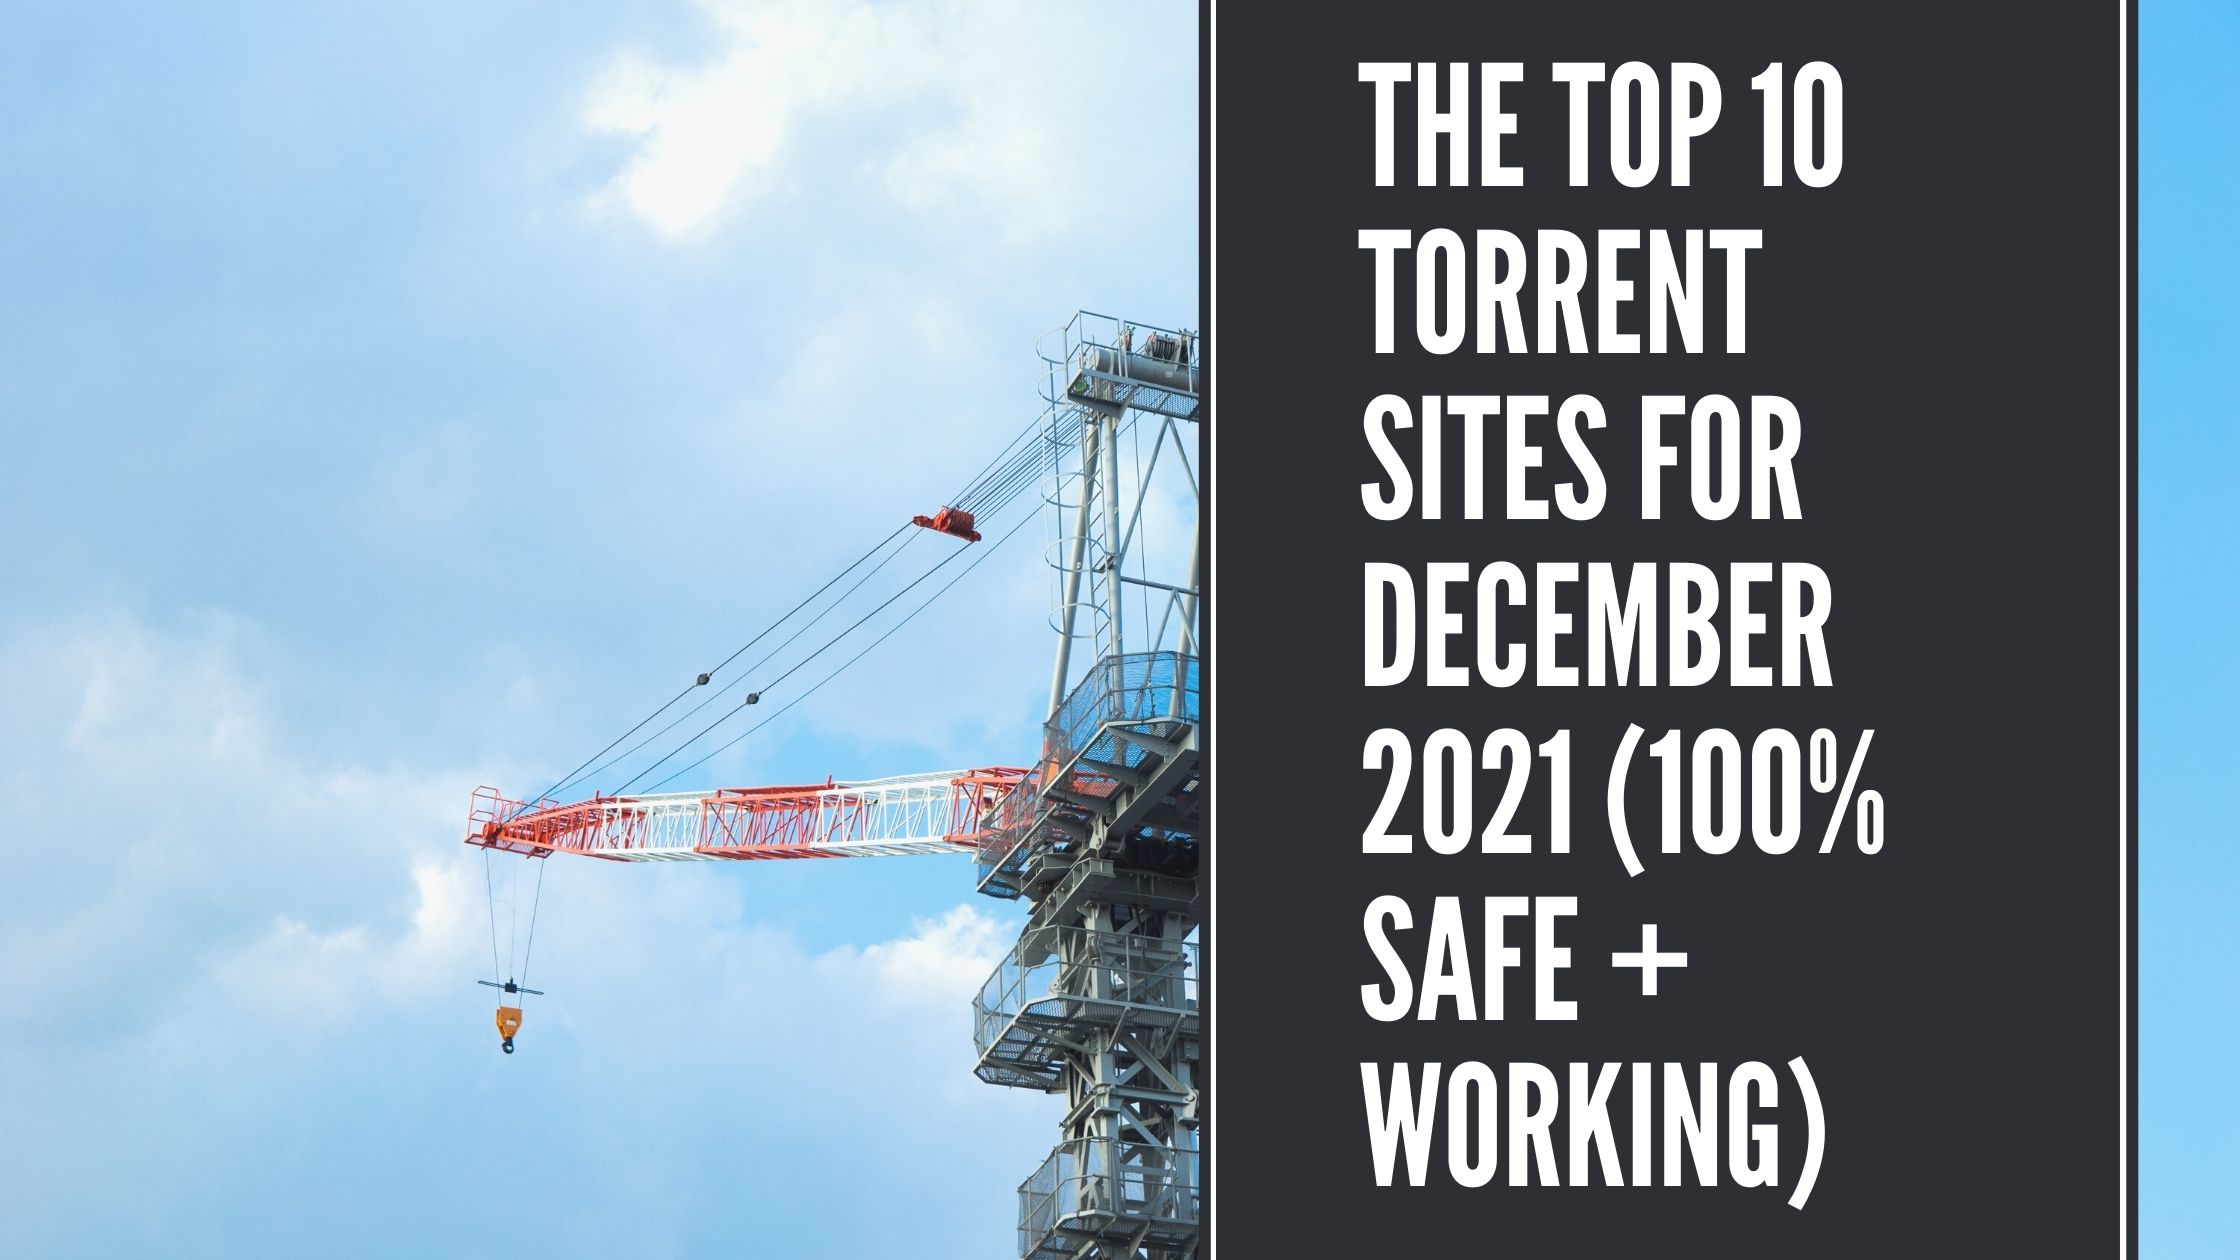 The Top 10 Torrent Sites for December 2021 (100 Safe + Working) हर